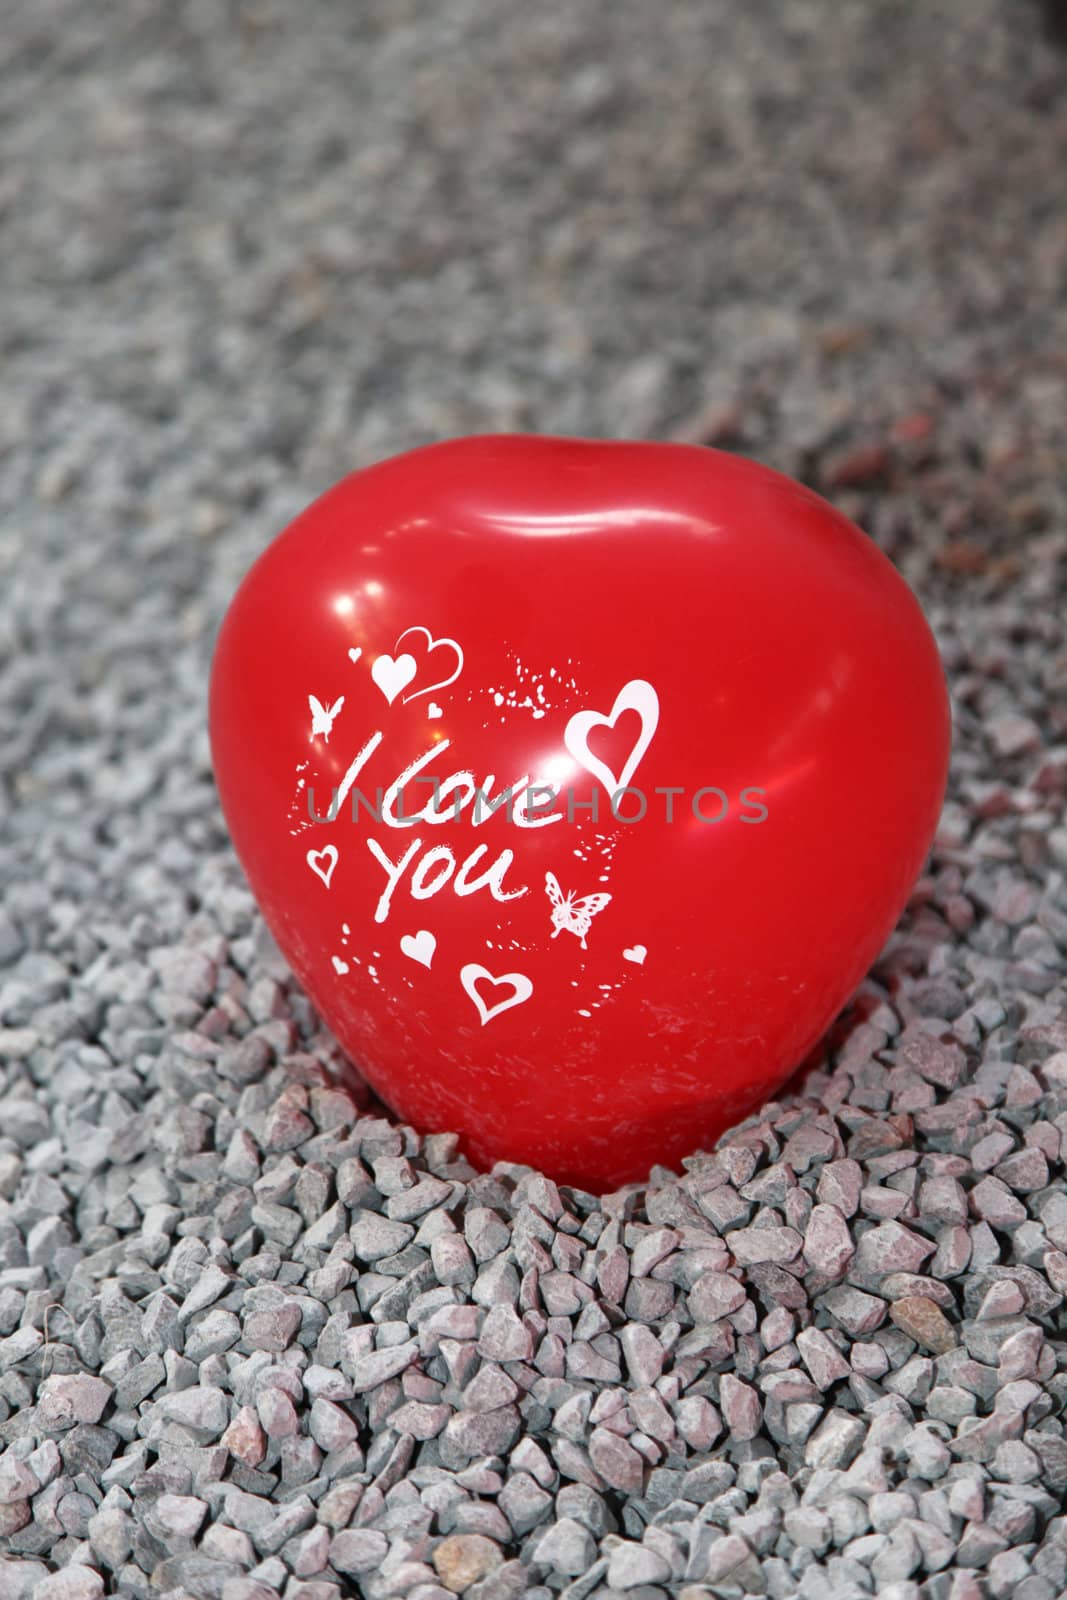 Red shaped heart with "I love uou' inscribed on it sitting on pebbles.